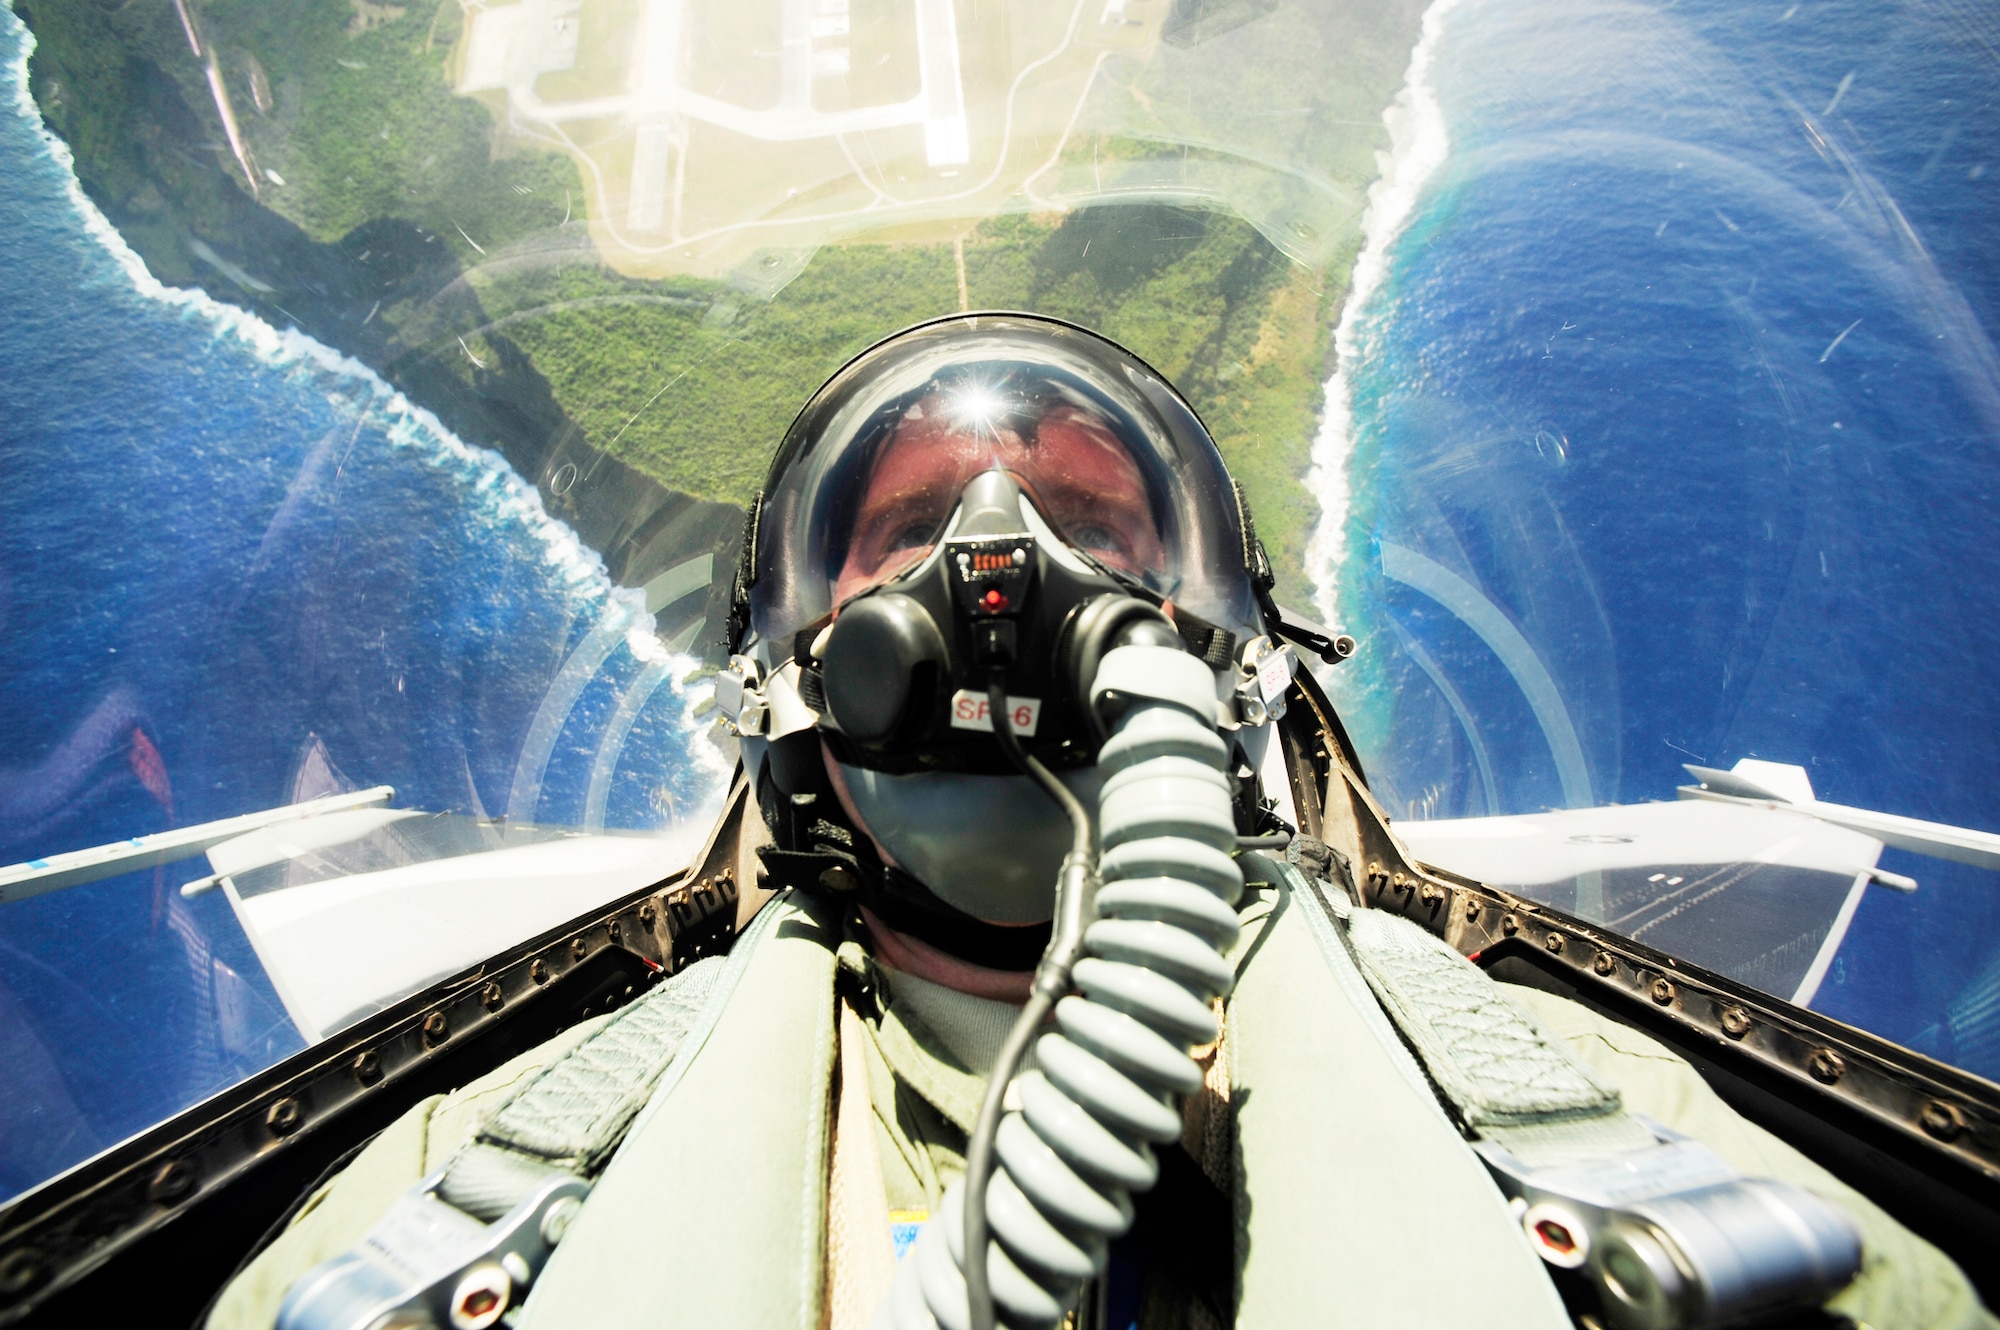 An F-16 Fighting Falcon pilot conducts an unrestricted vertical climb from Andersen Air Force Base, Guam, during Exercise Cope North, Feb. 15, 2010. The U.S. Air Force and the Japan Air Self-Defense Force conduct the exercise annually at Andersen to increase combat readiness and interoperability.  (U.S. Air Force photo/Staff Sgt. Jacob N. Bailey)